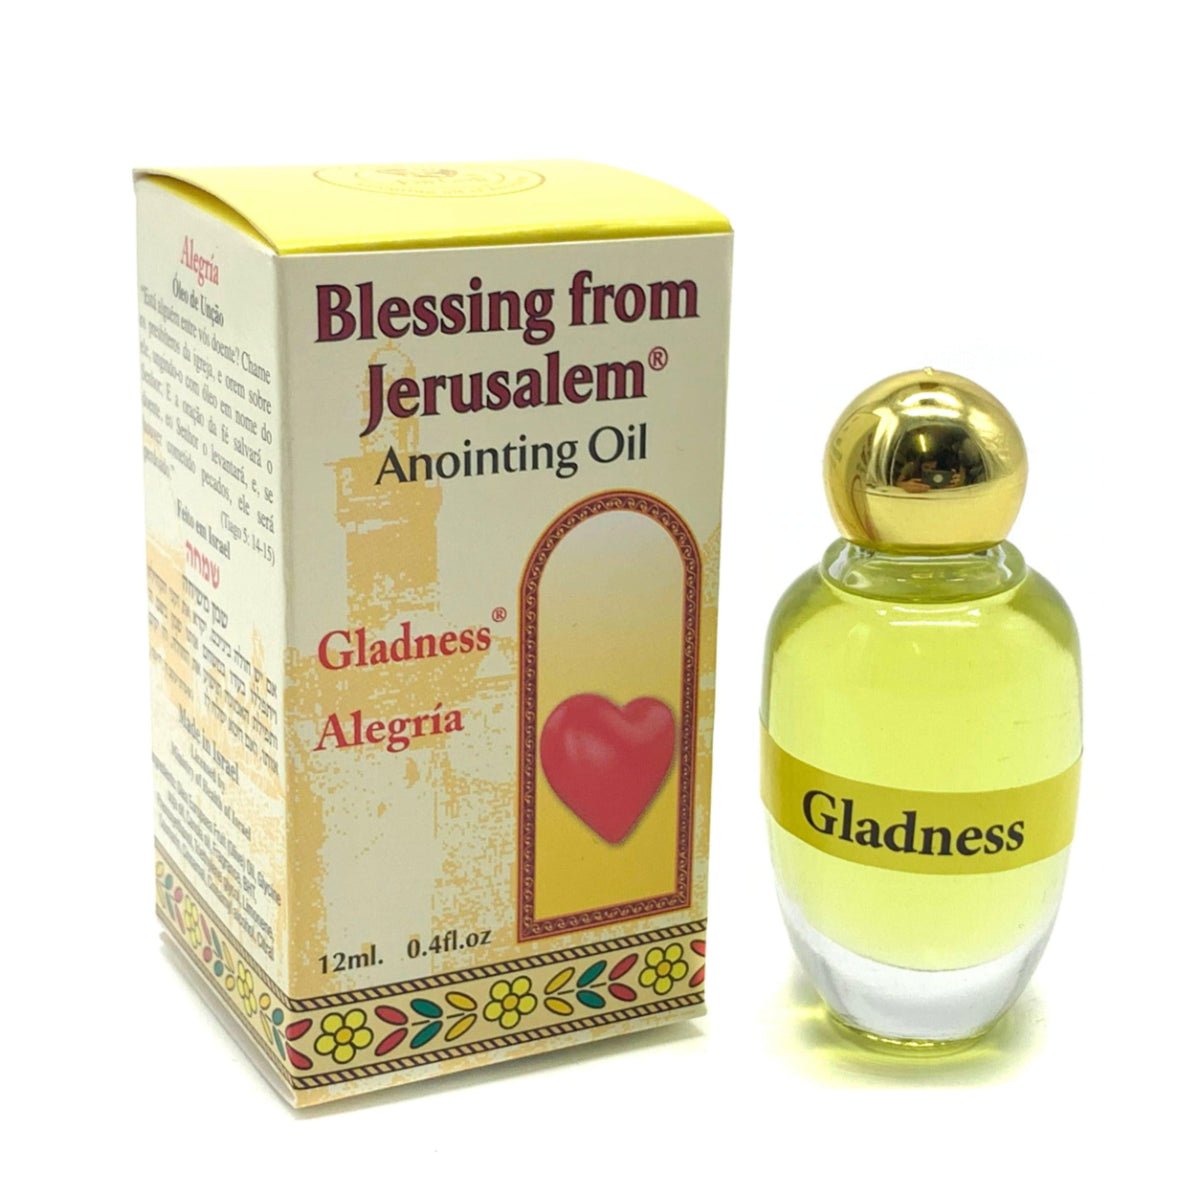 Anointing Oil Gladness 12 ml. - 0.4oz from Jerusalem Israel